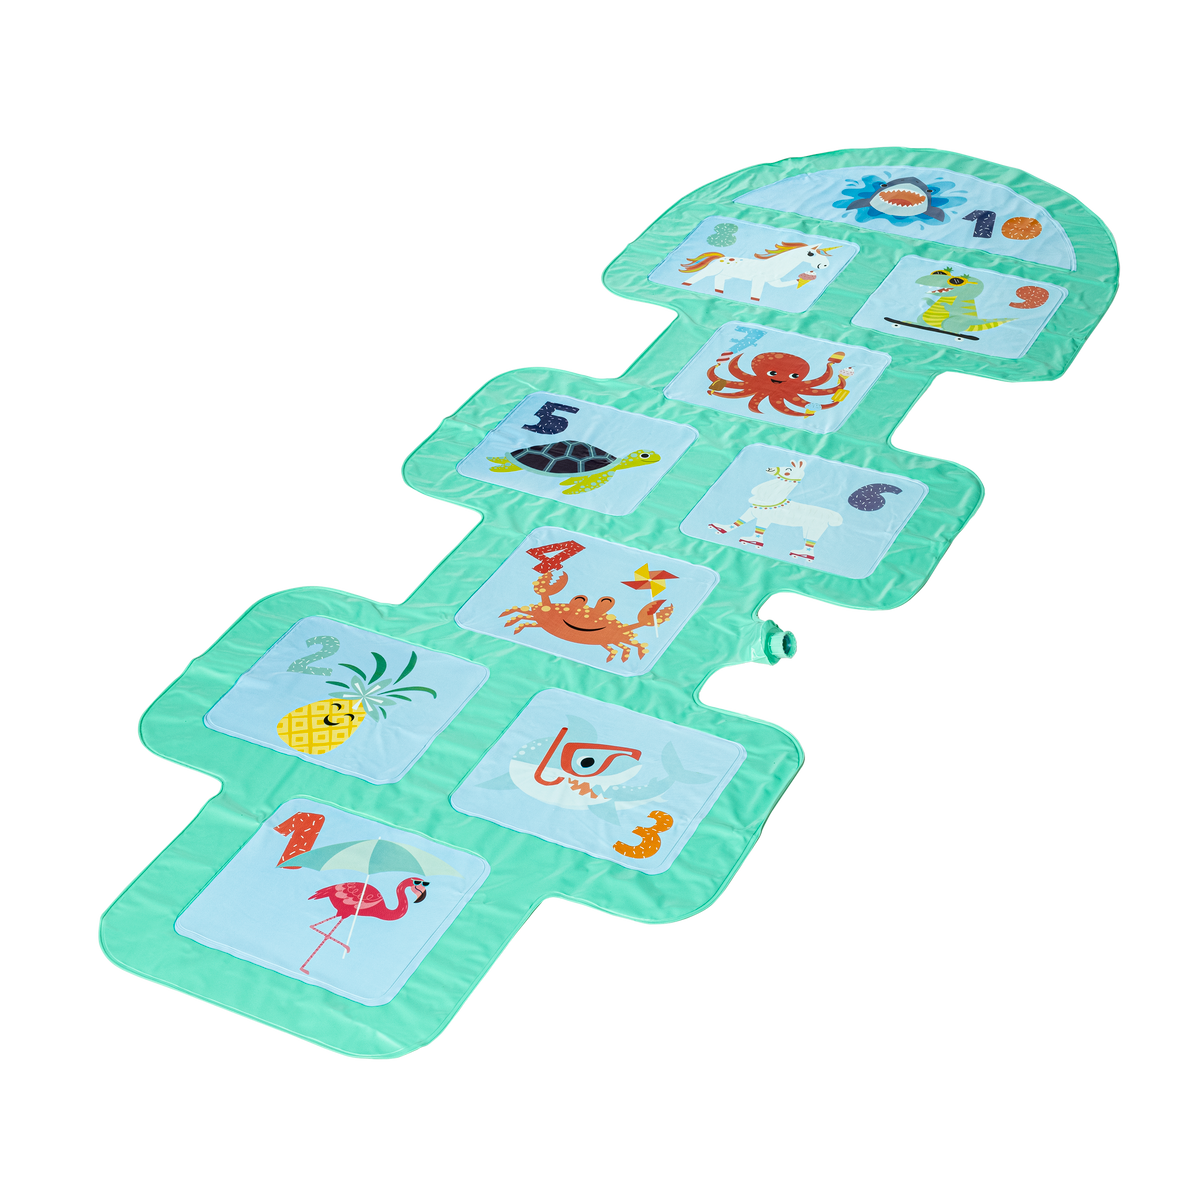 Hopscotch sprinkler with fun creature prints